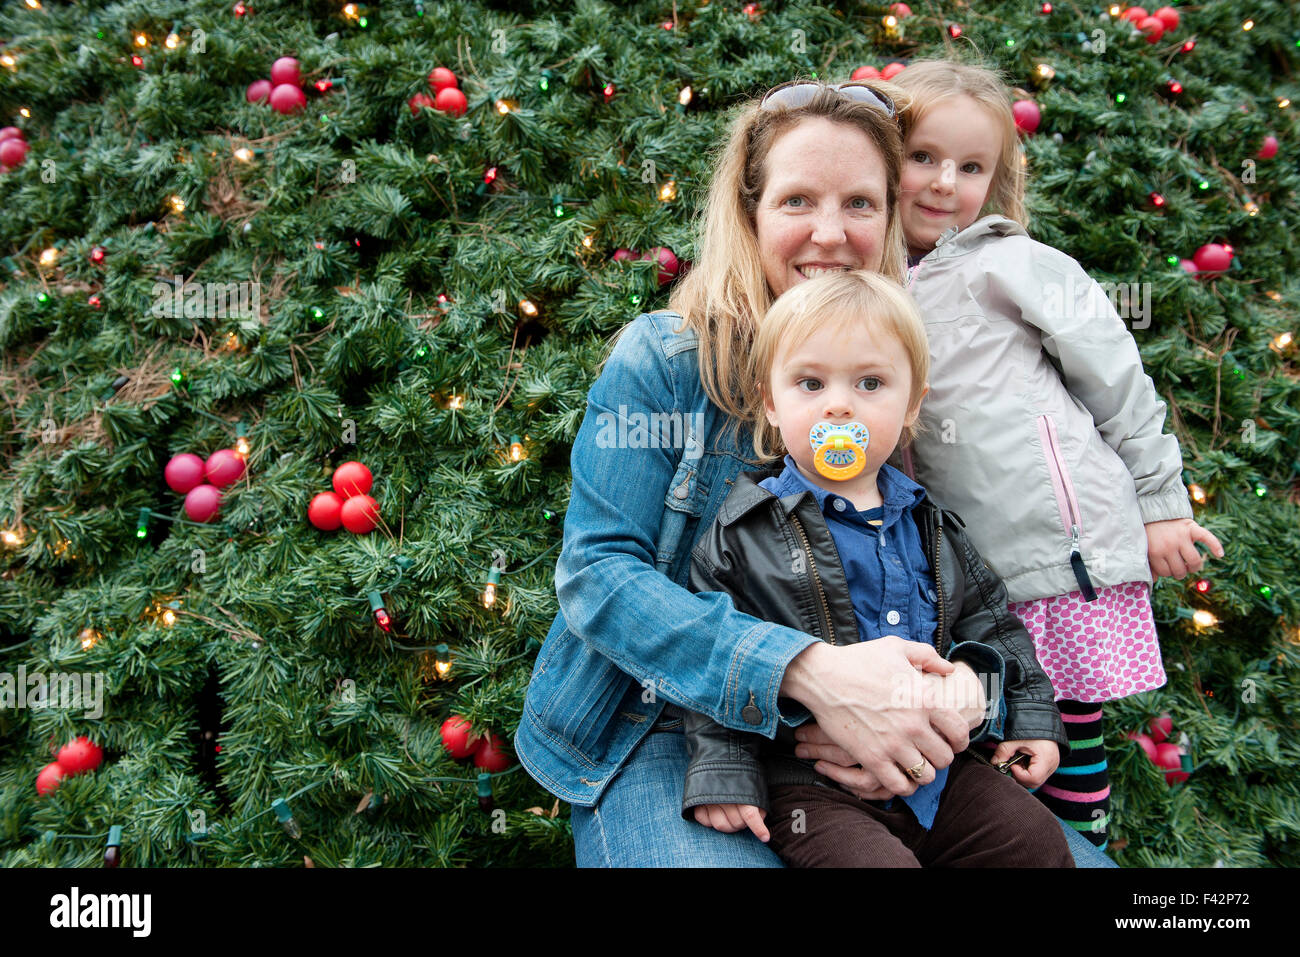 Mother and children posing in front of outdoor Christmas tree, portrait Stock Photo